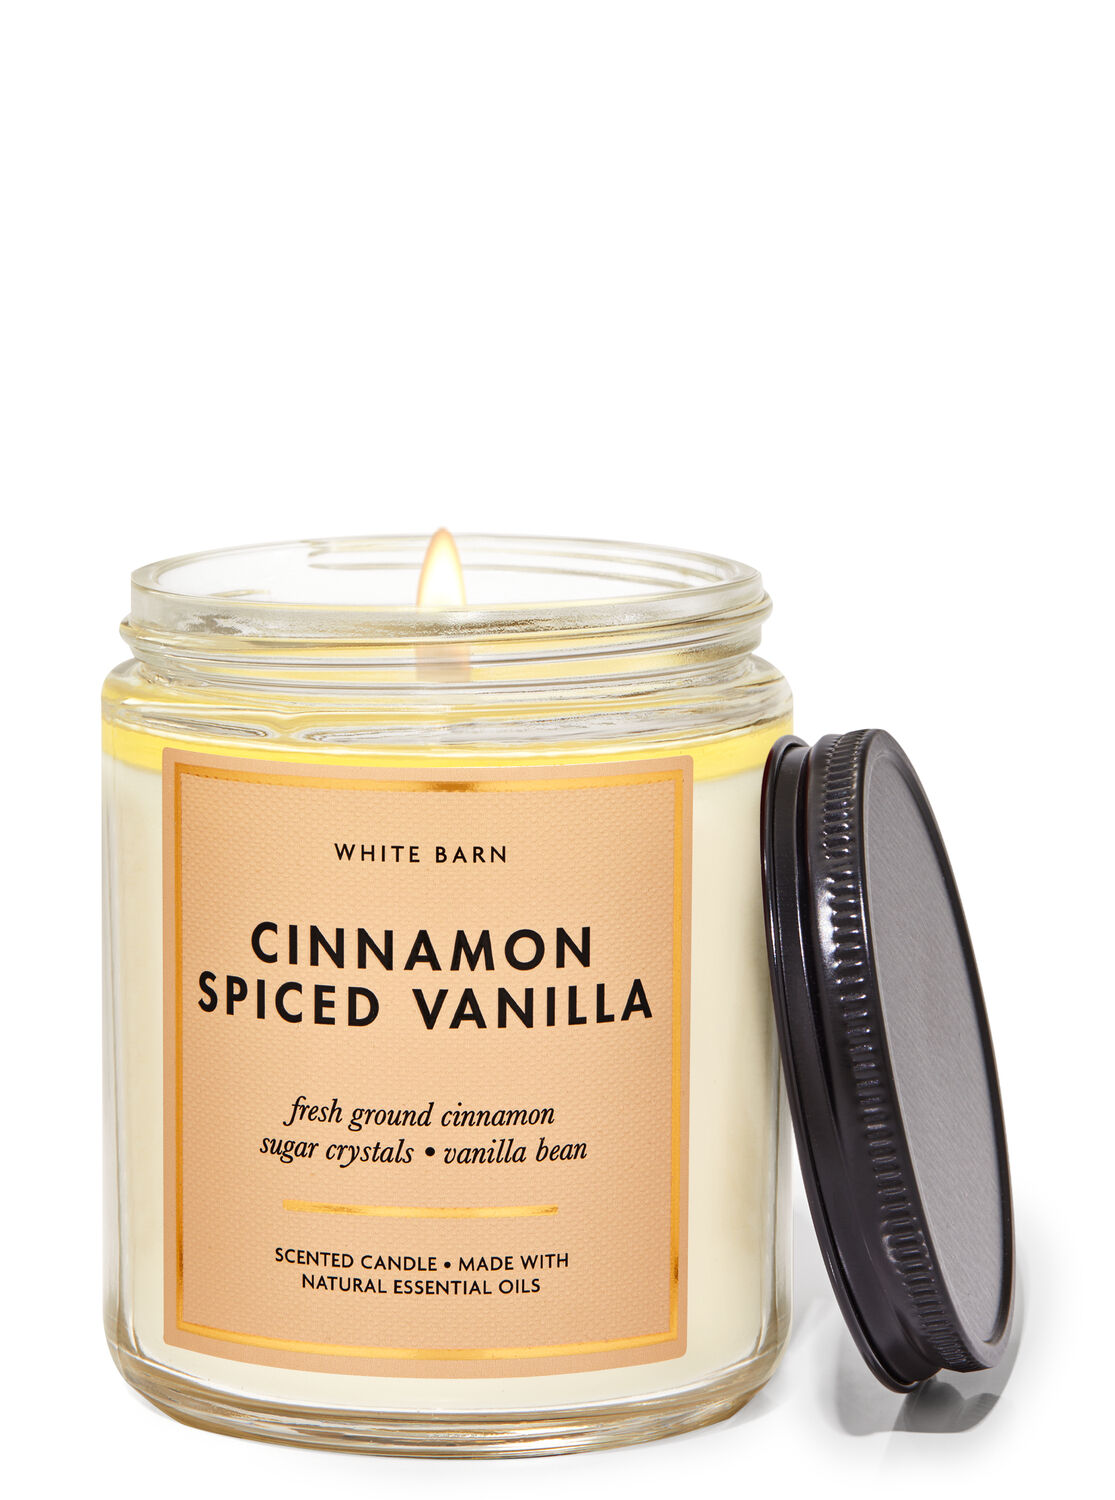 Bath & Body Works CINNAMON SPICED VANILLA 3-Wick Candles scented candle 14.5 oz 